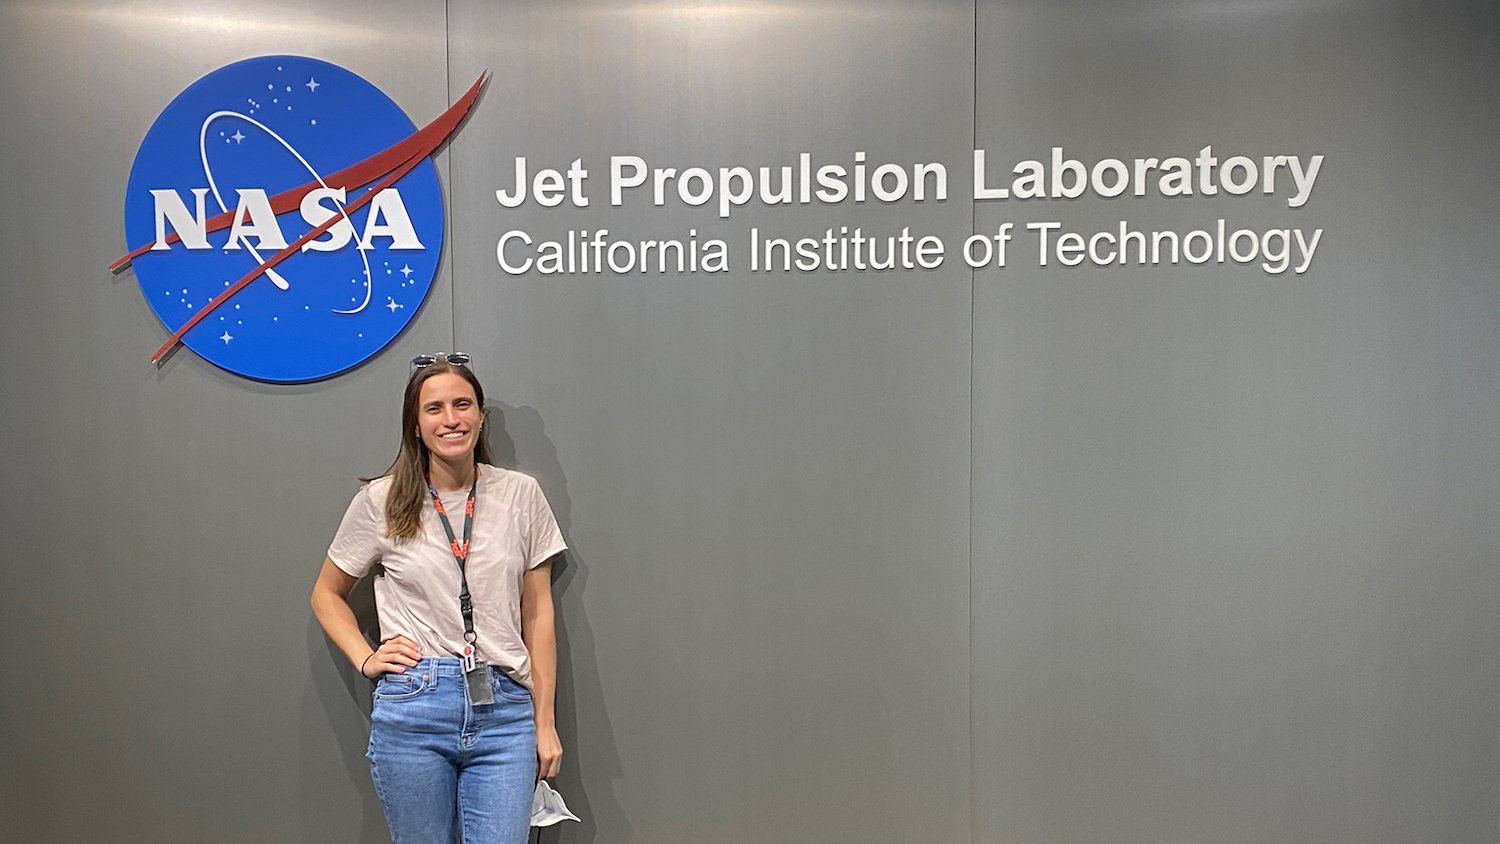 NC State student poses in front of the NASA logo at the Jet Propulsion Laboratory headquarters in Pasadena, California